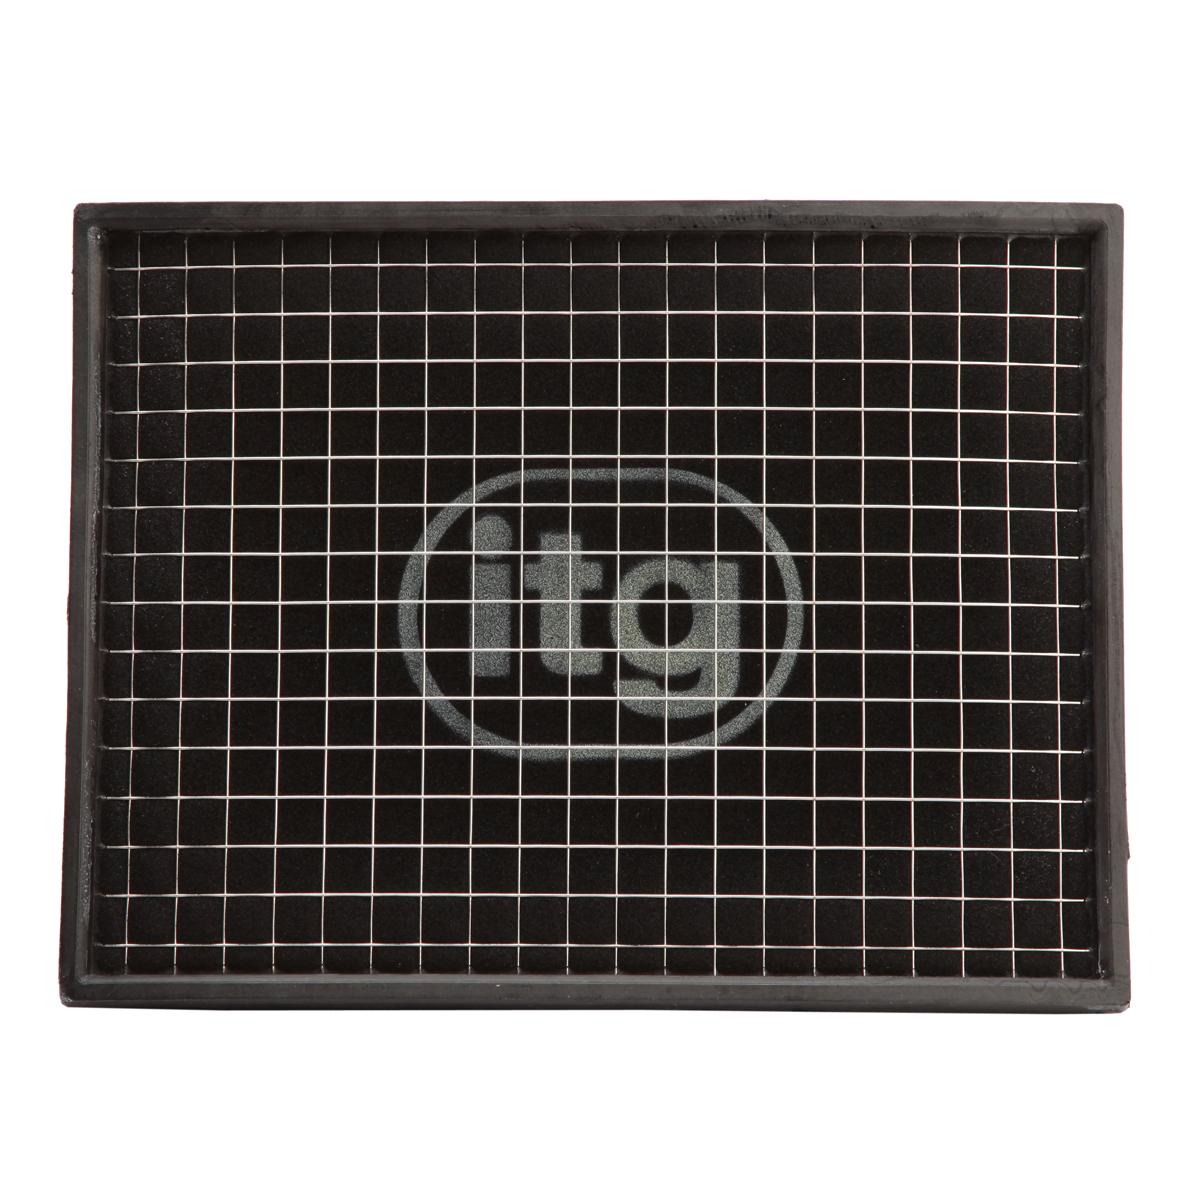 ITG Air Filter For Vauxhall Astra H 1.9 Cdti (09/04>)